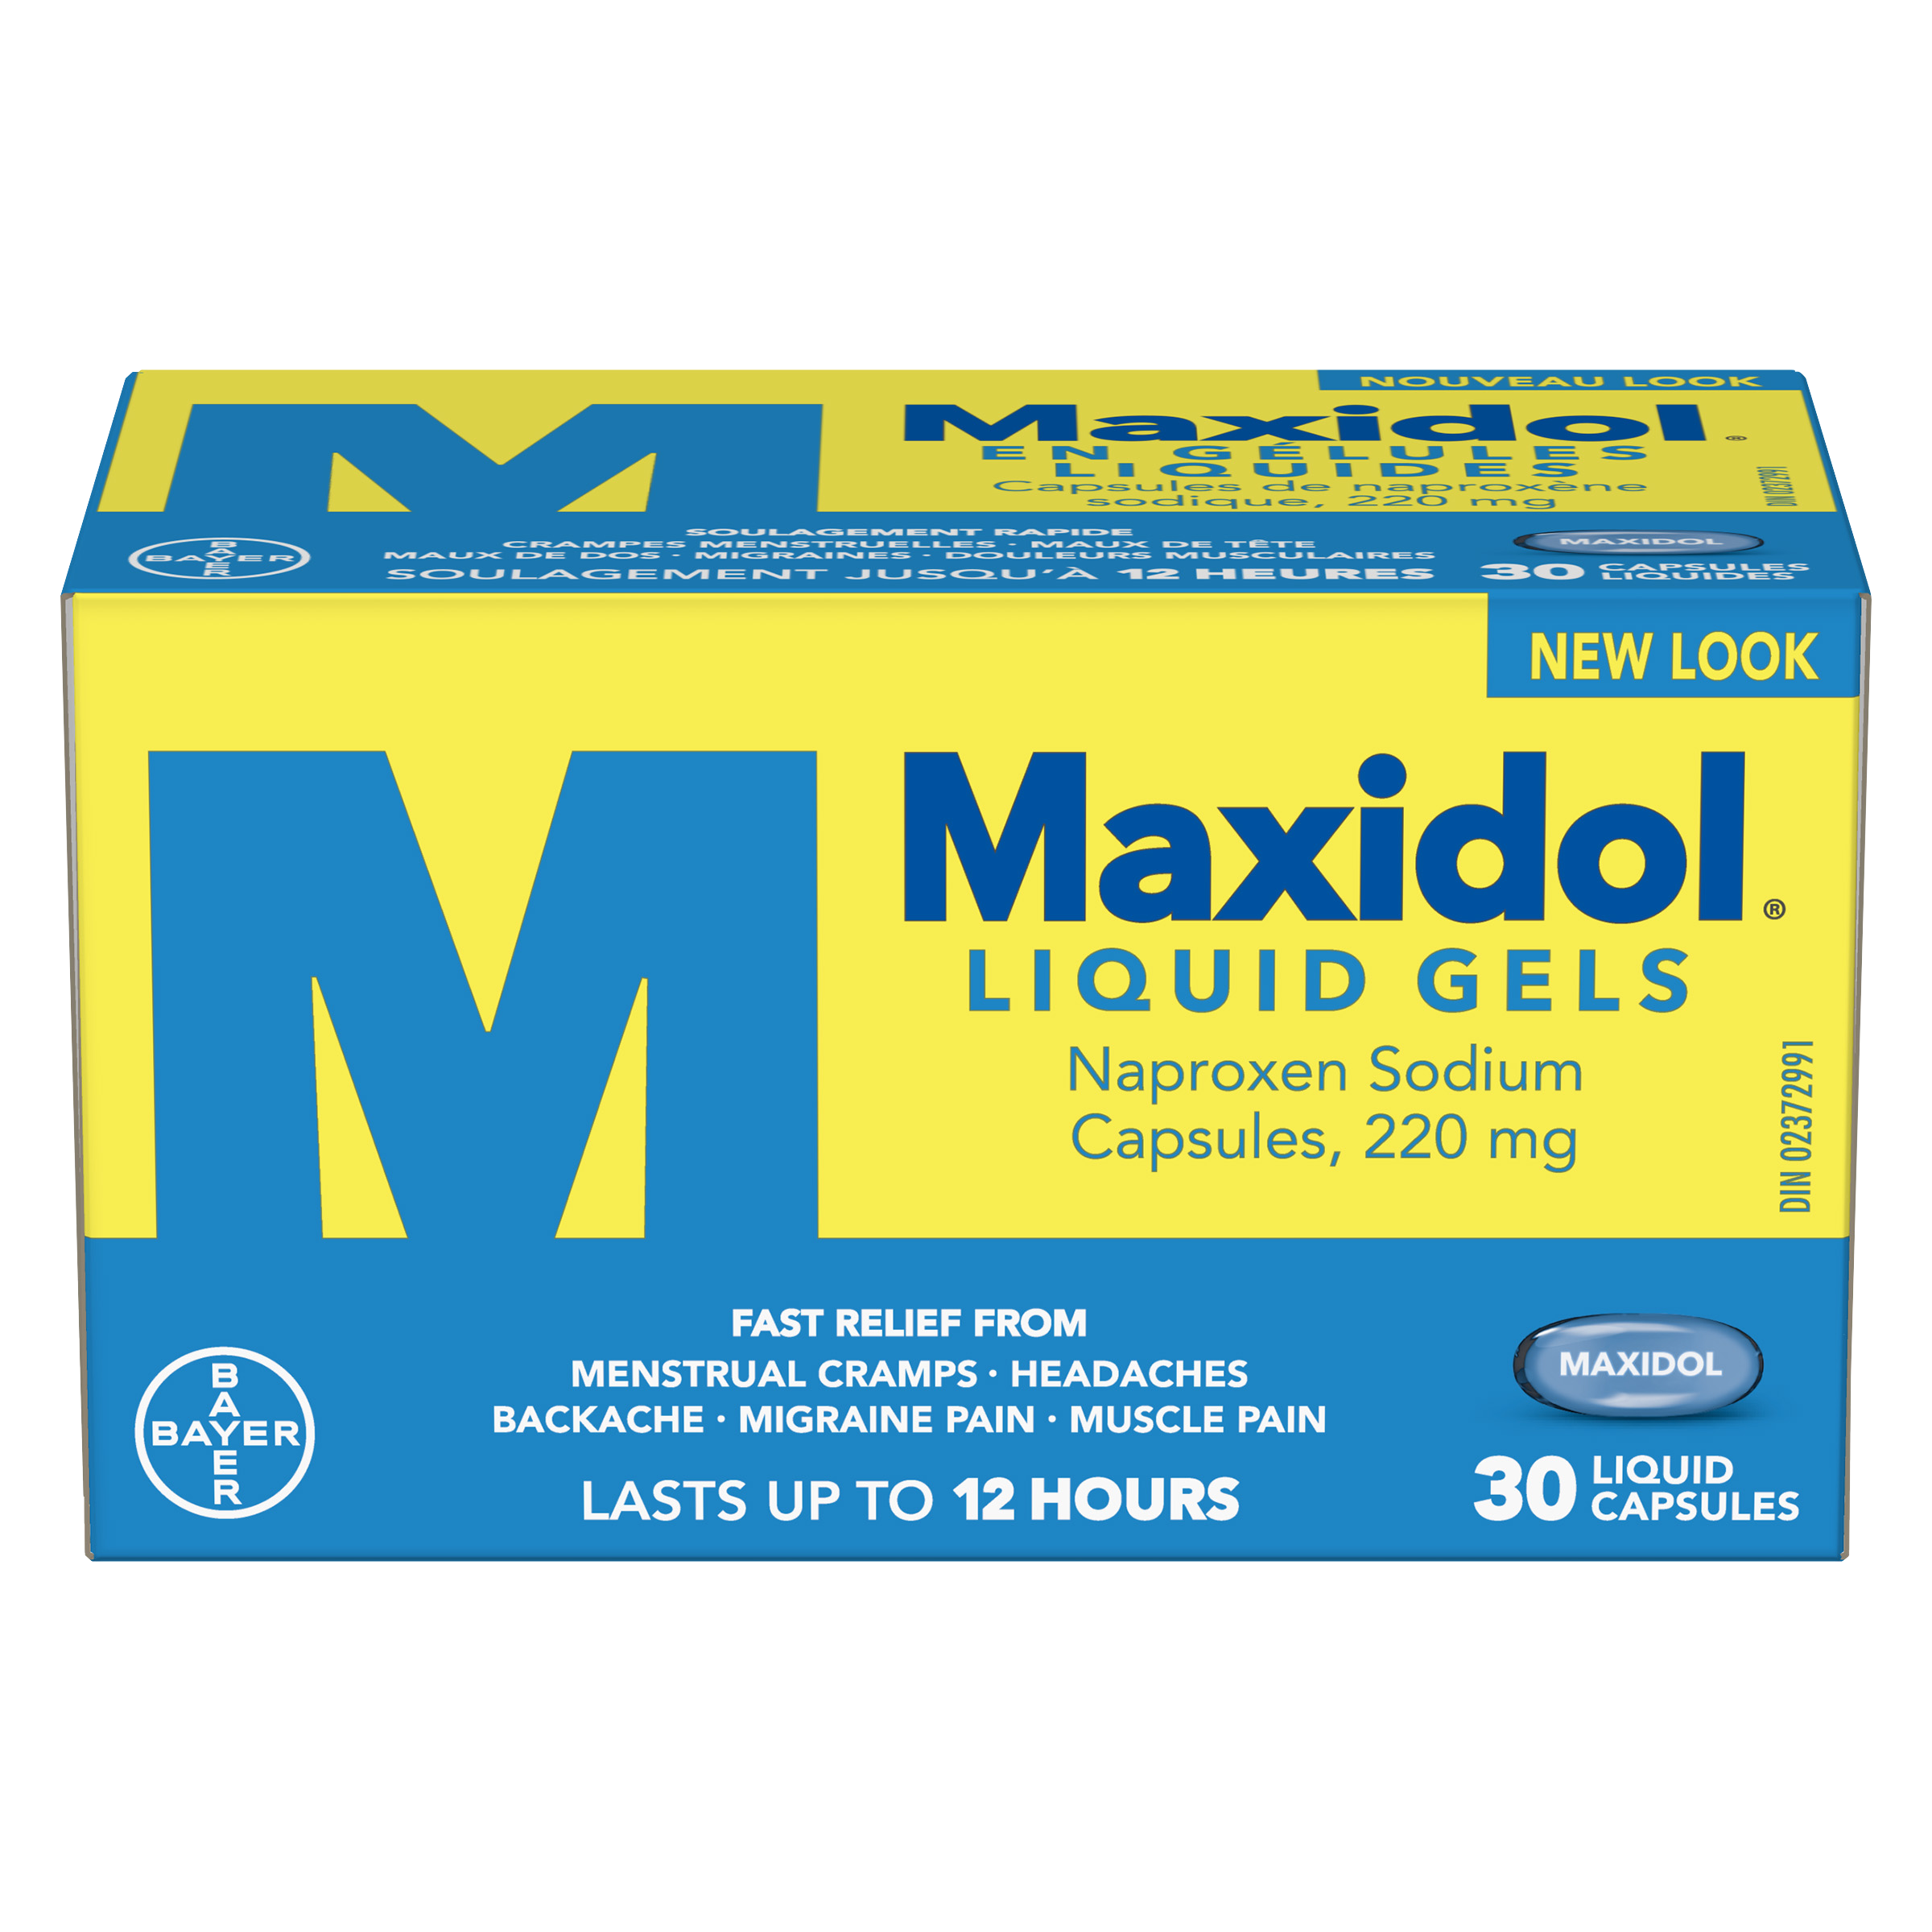 Yellow and blue box of Midol Liquid Gel tablets